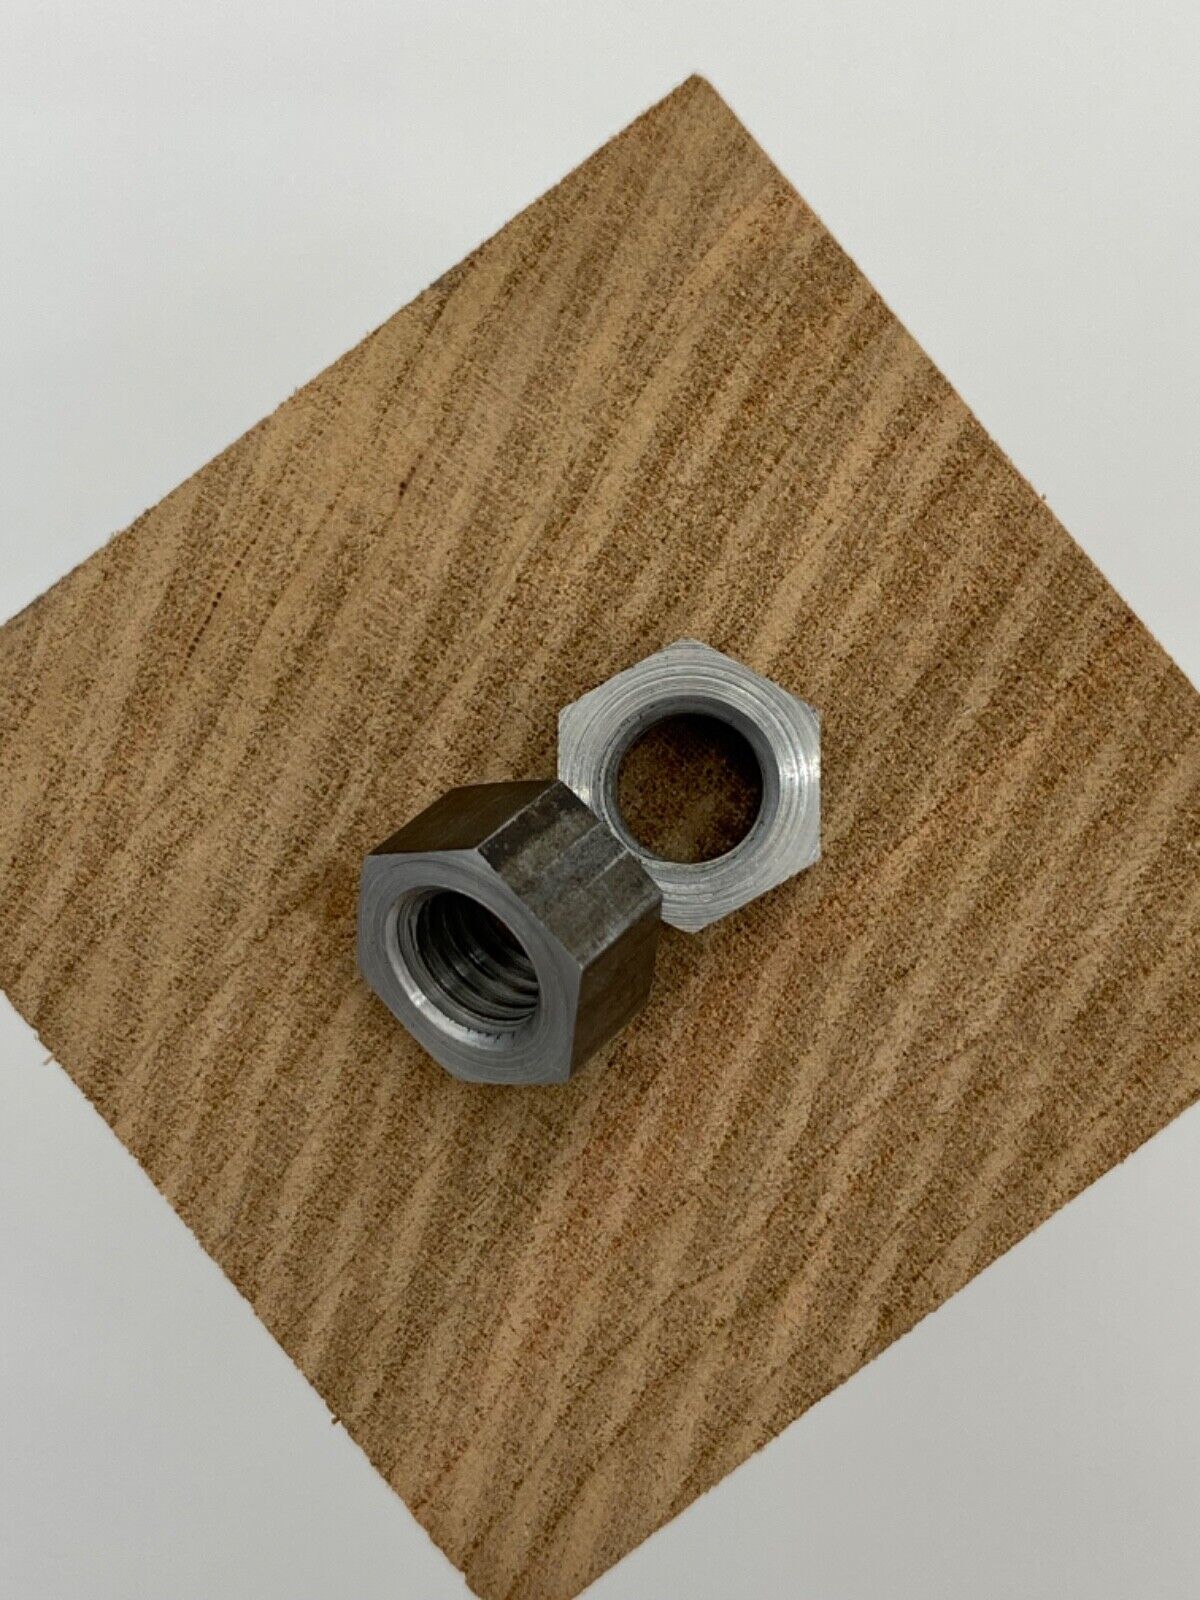 Stud Removal Nuts for Stanley Cast Iron Planes